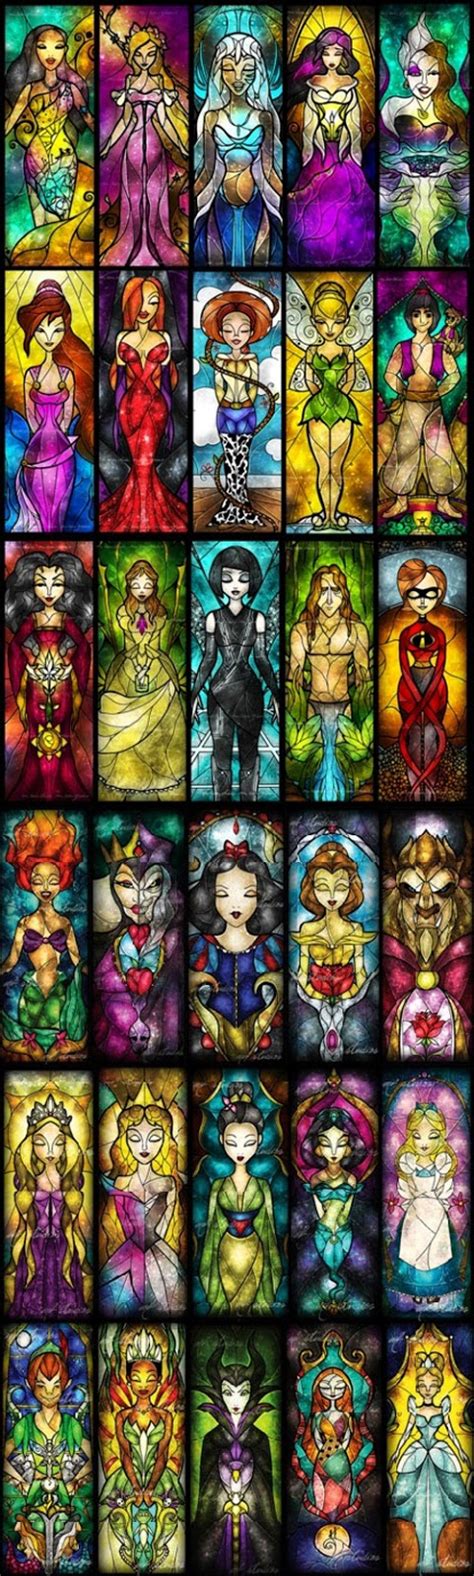 Down The Rabbit Hole Disney Themed Stained Glass